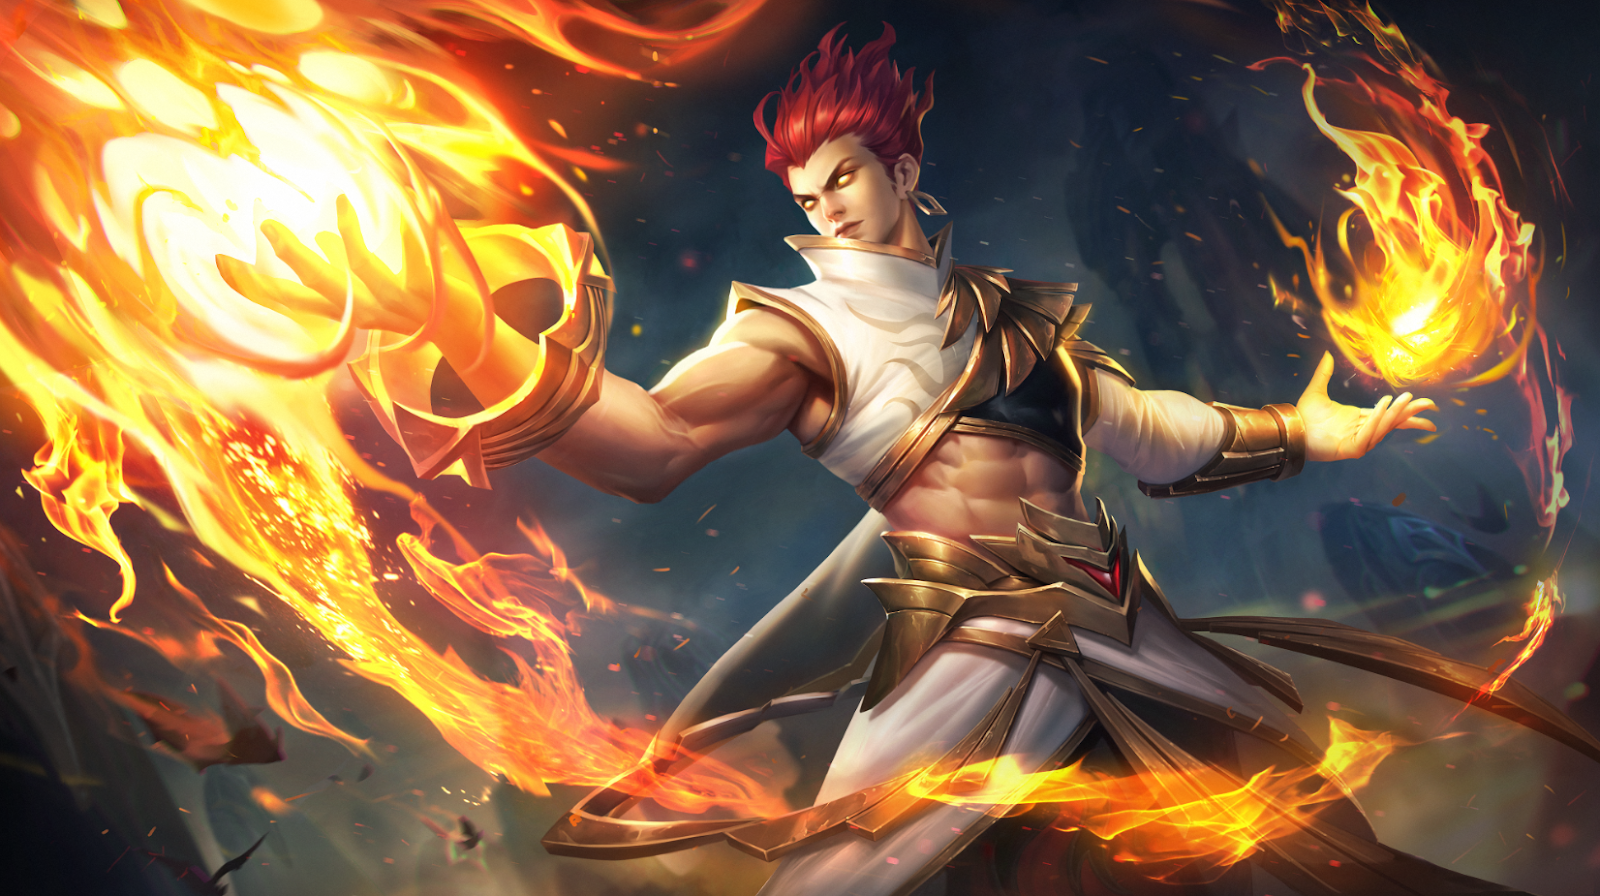 Image  Valir skin.png  Mobile Legends Wiki  FANDOM powered by Wikia